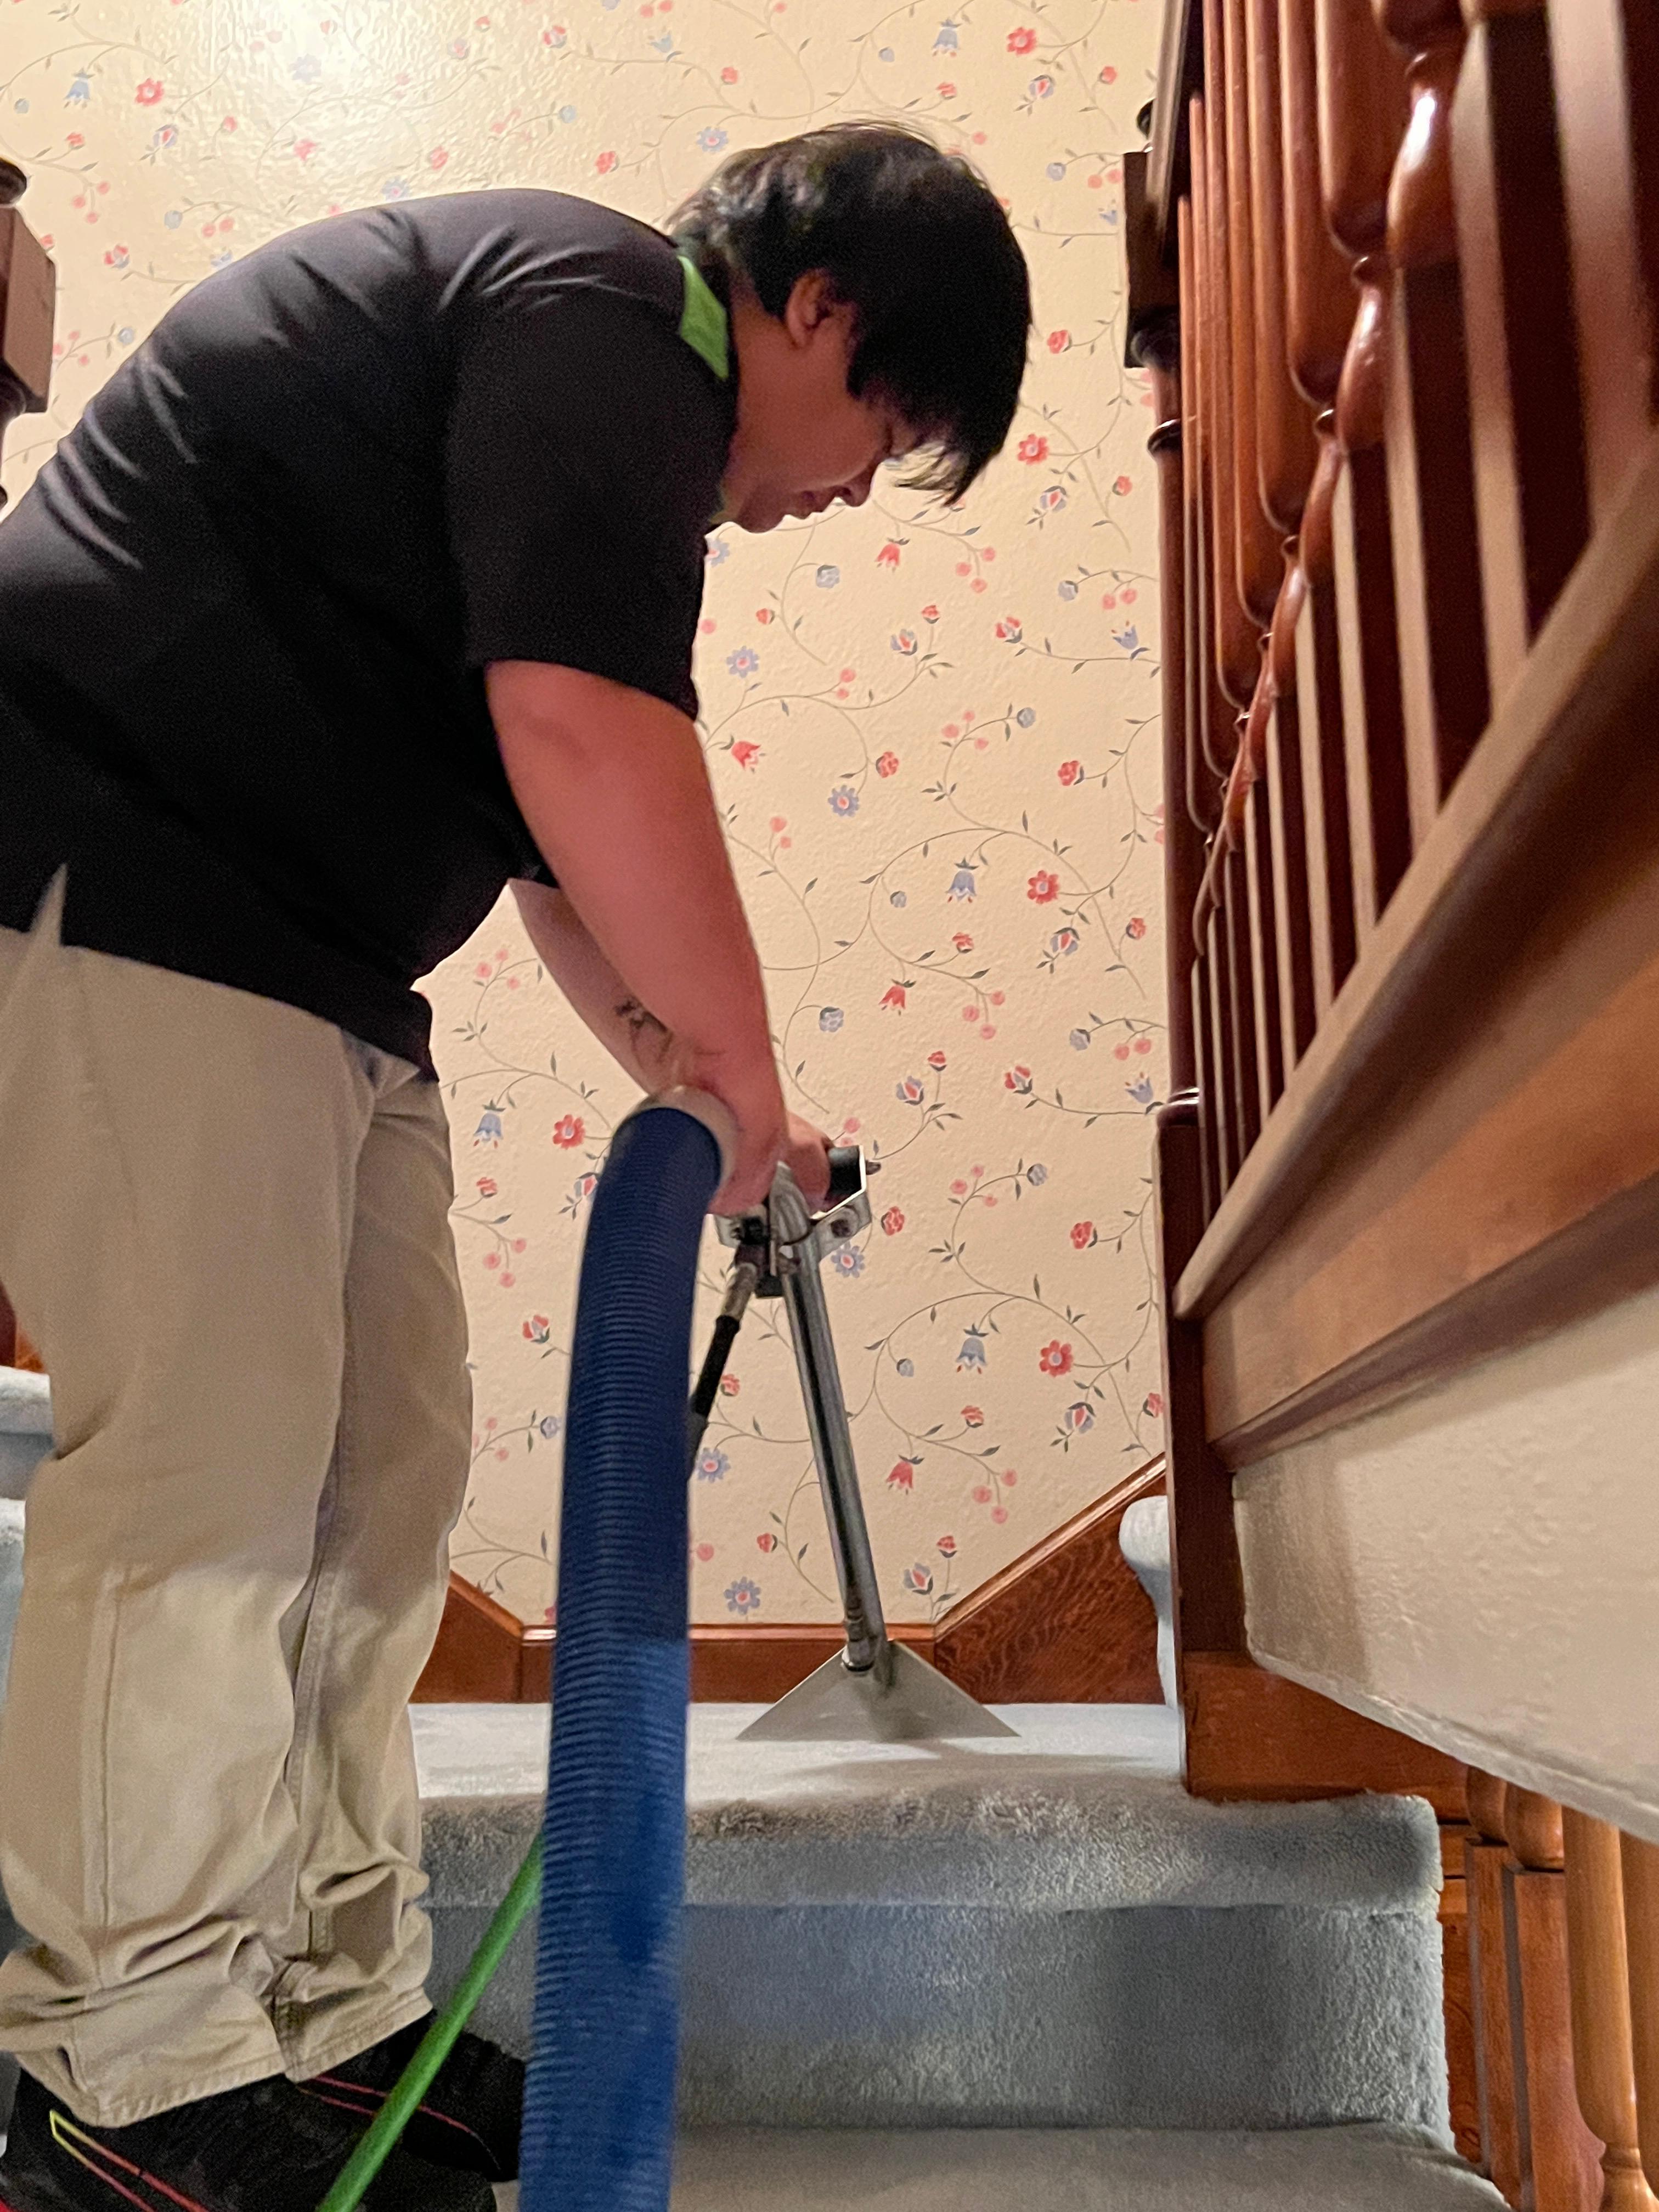 Even the highest-quality carpet and upholstery can show soiling over time. Protect your investment by calling SERVPRO of Spencer & Iowa Great Lakes.